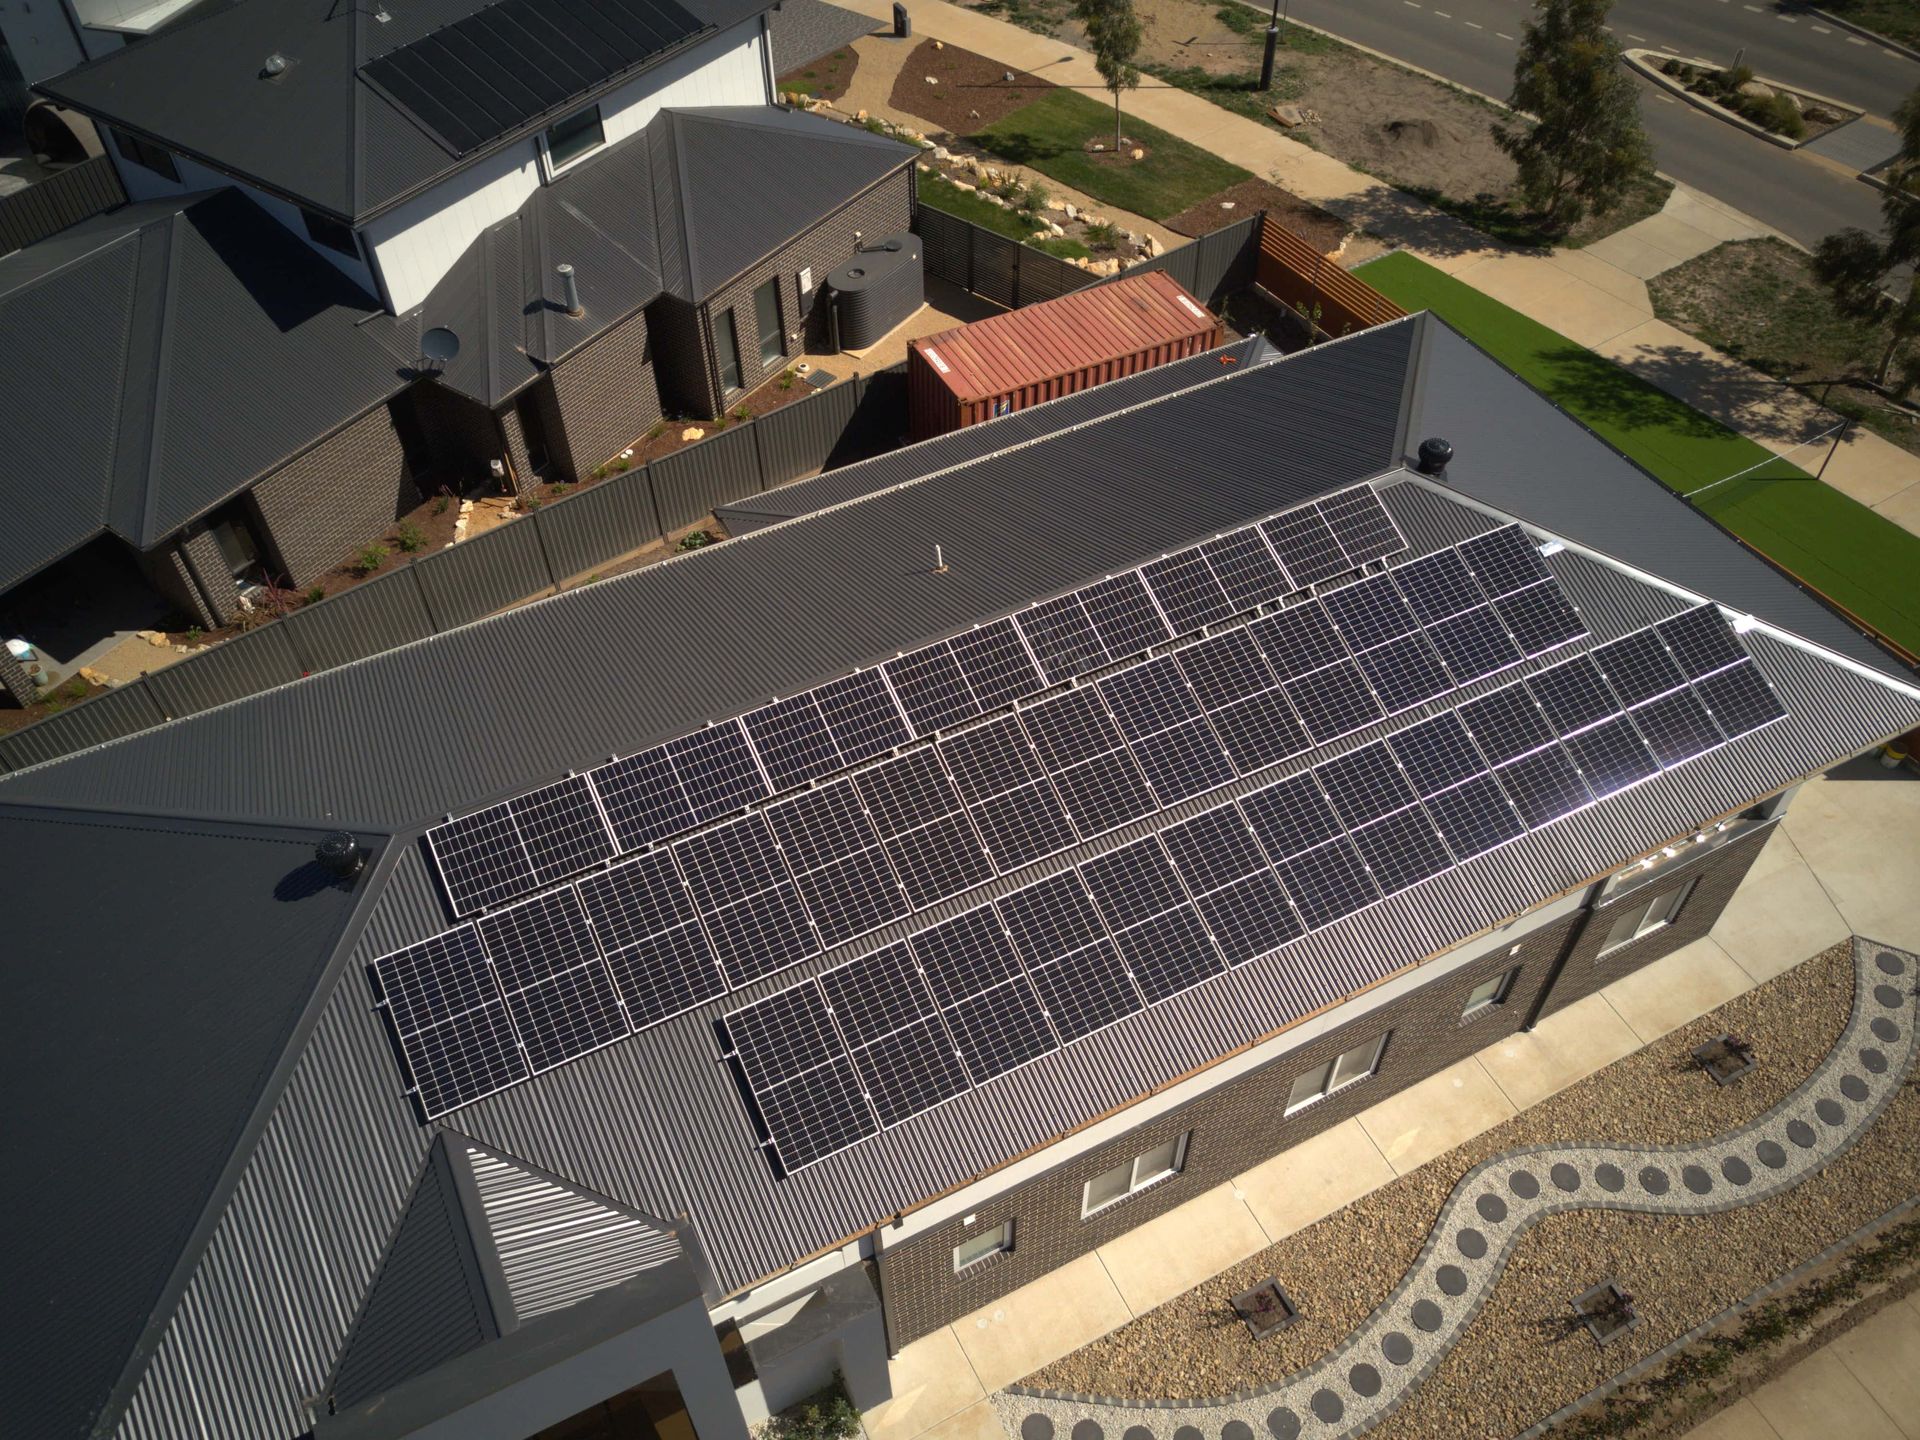 An aerial view of a house with solar panels on the roof